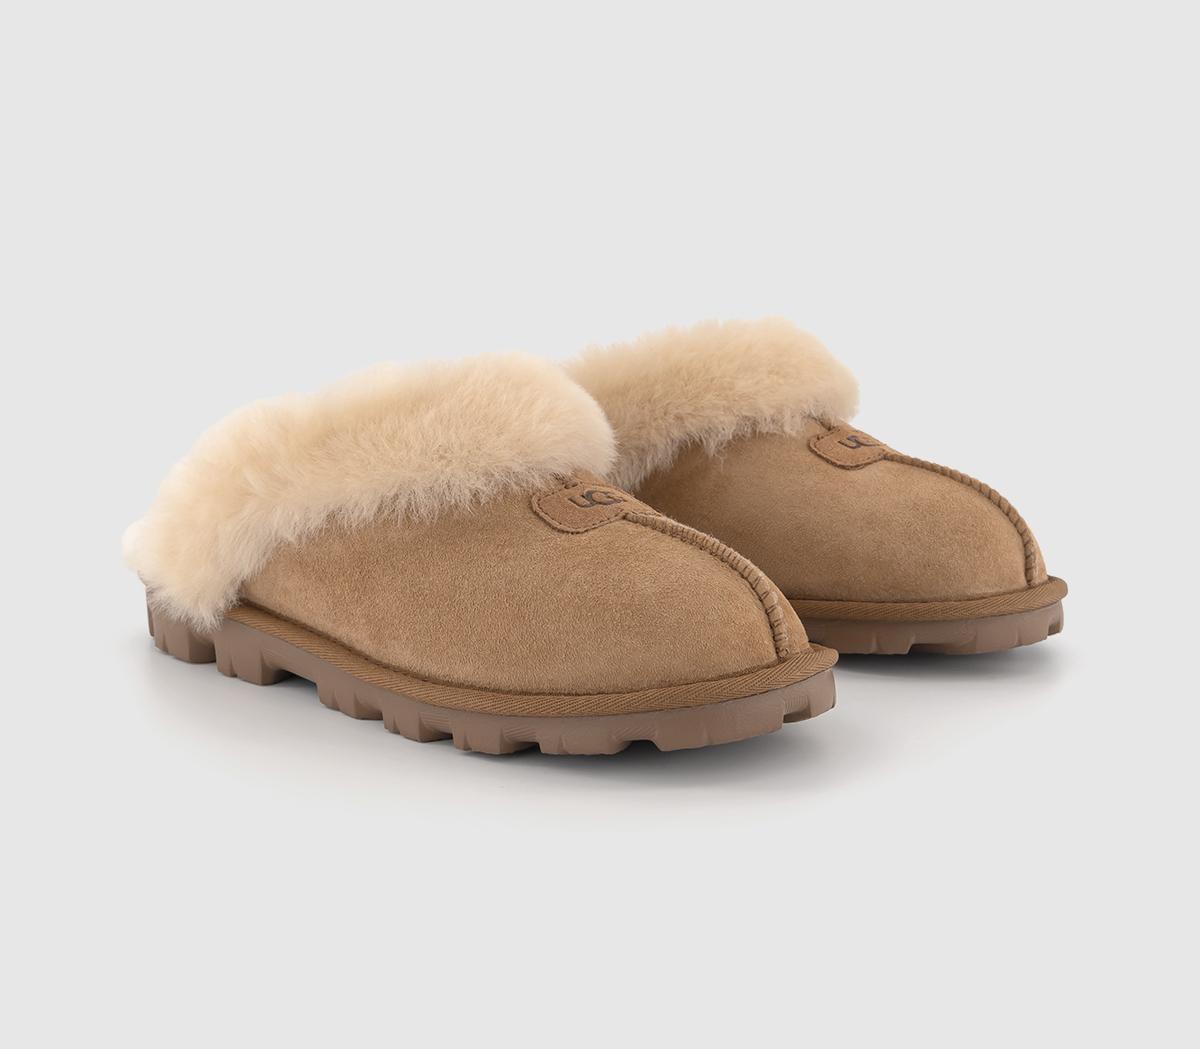 UGG Coquette Slippers Chestnut - Flat Shoes for Women